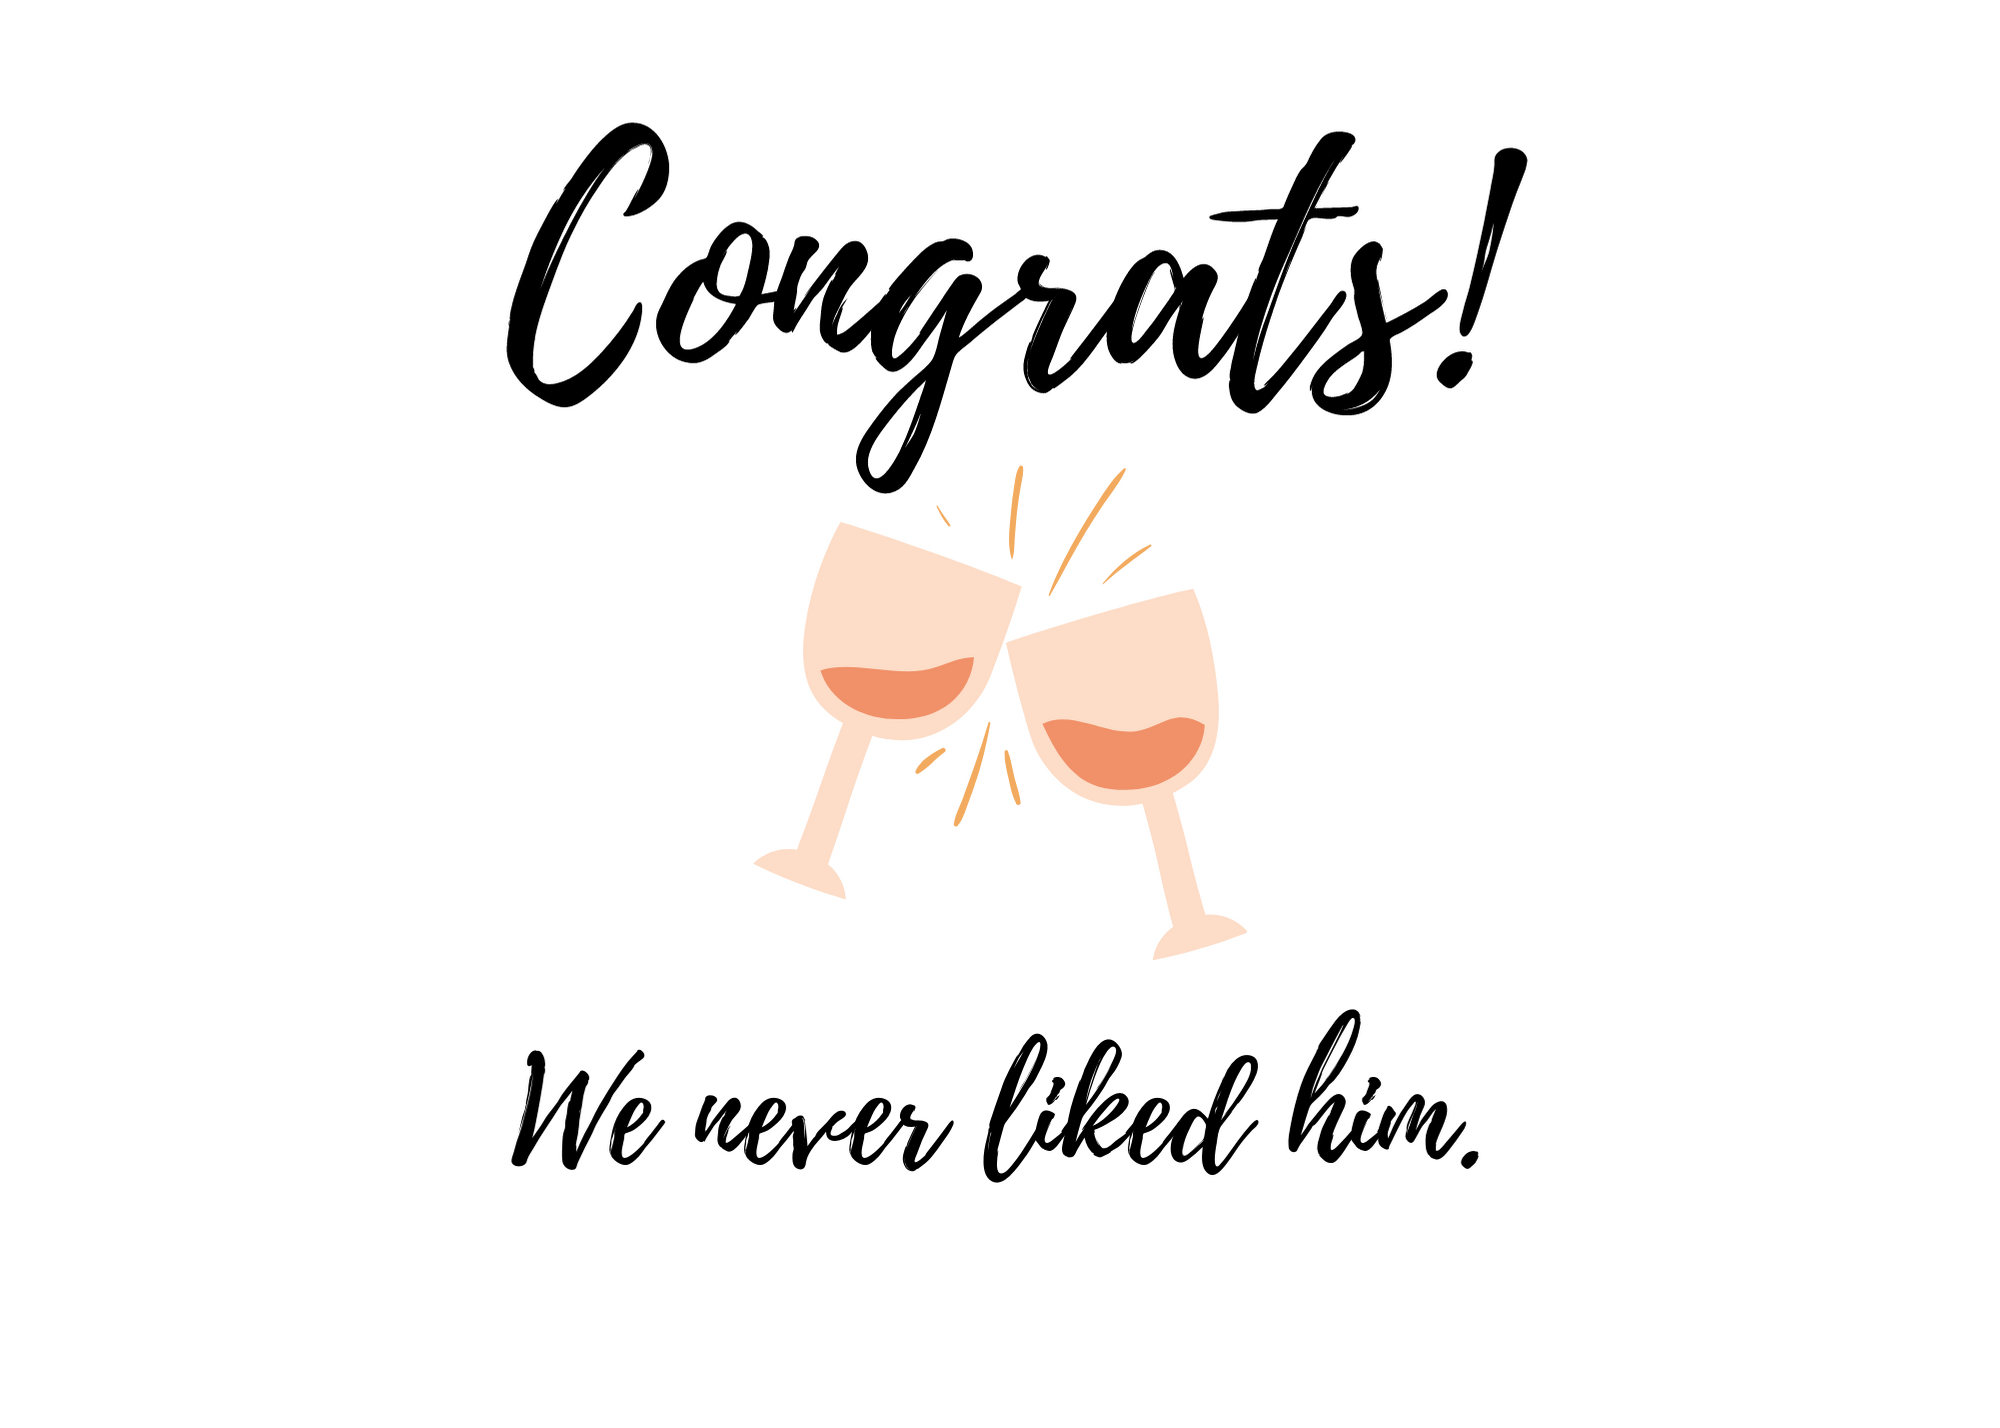 White seed paper greeting card saying "Congrats!  We never liked him."